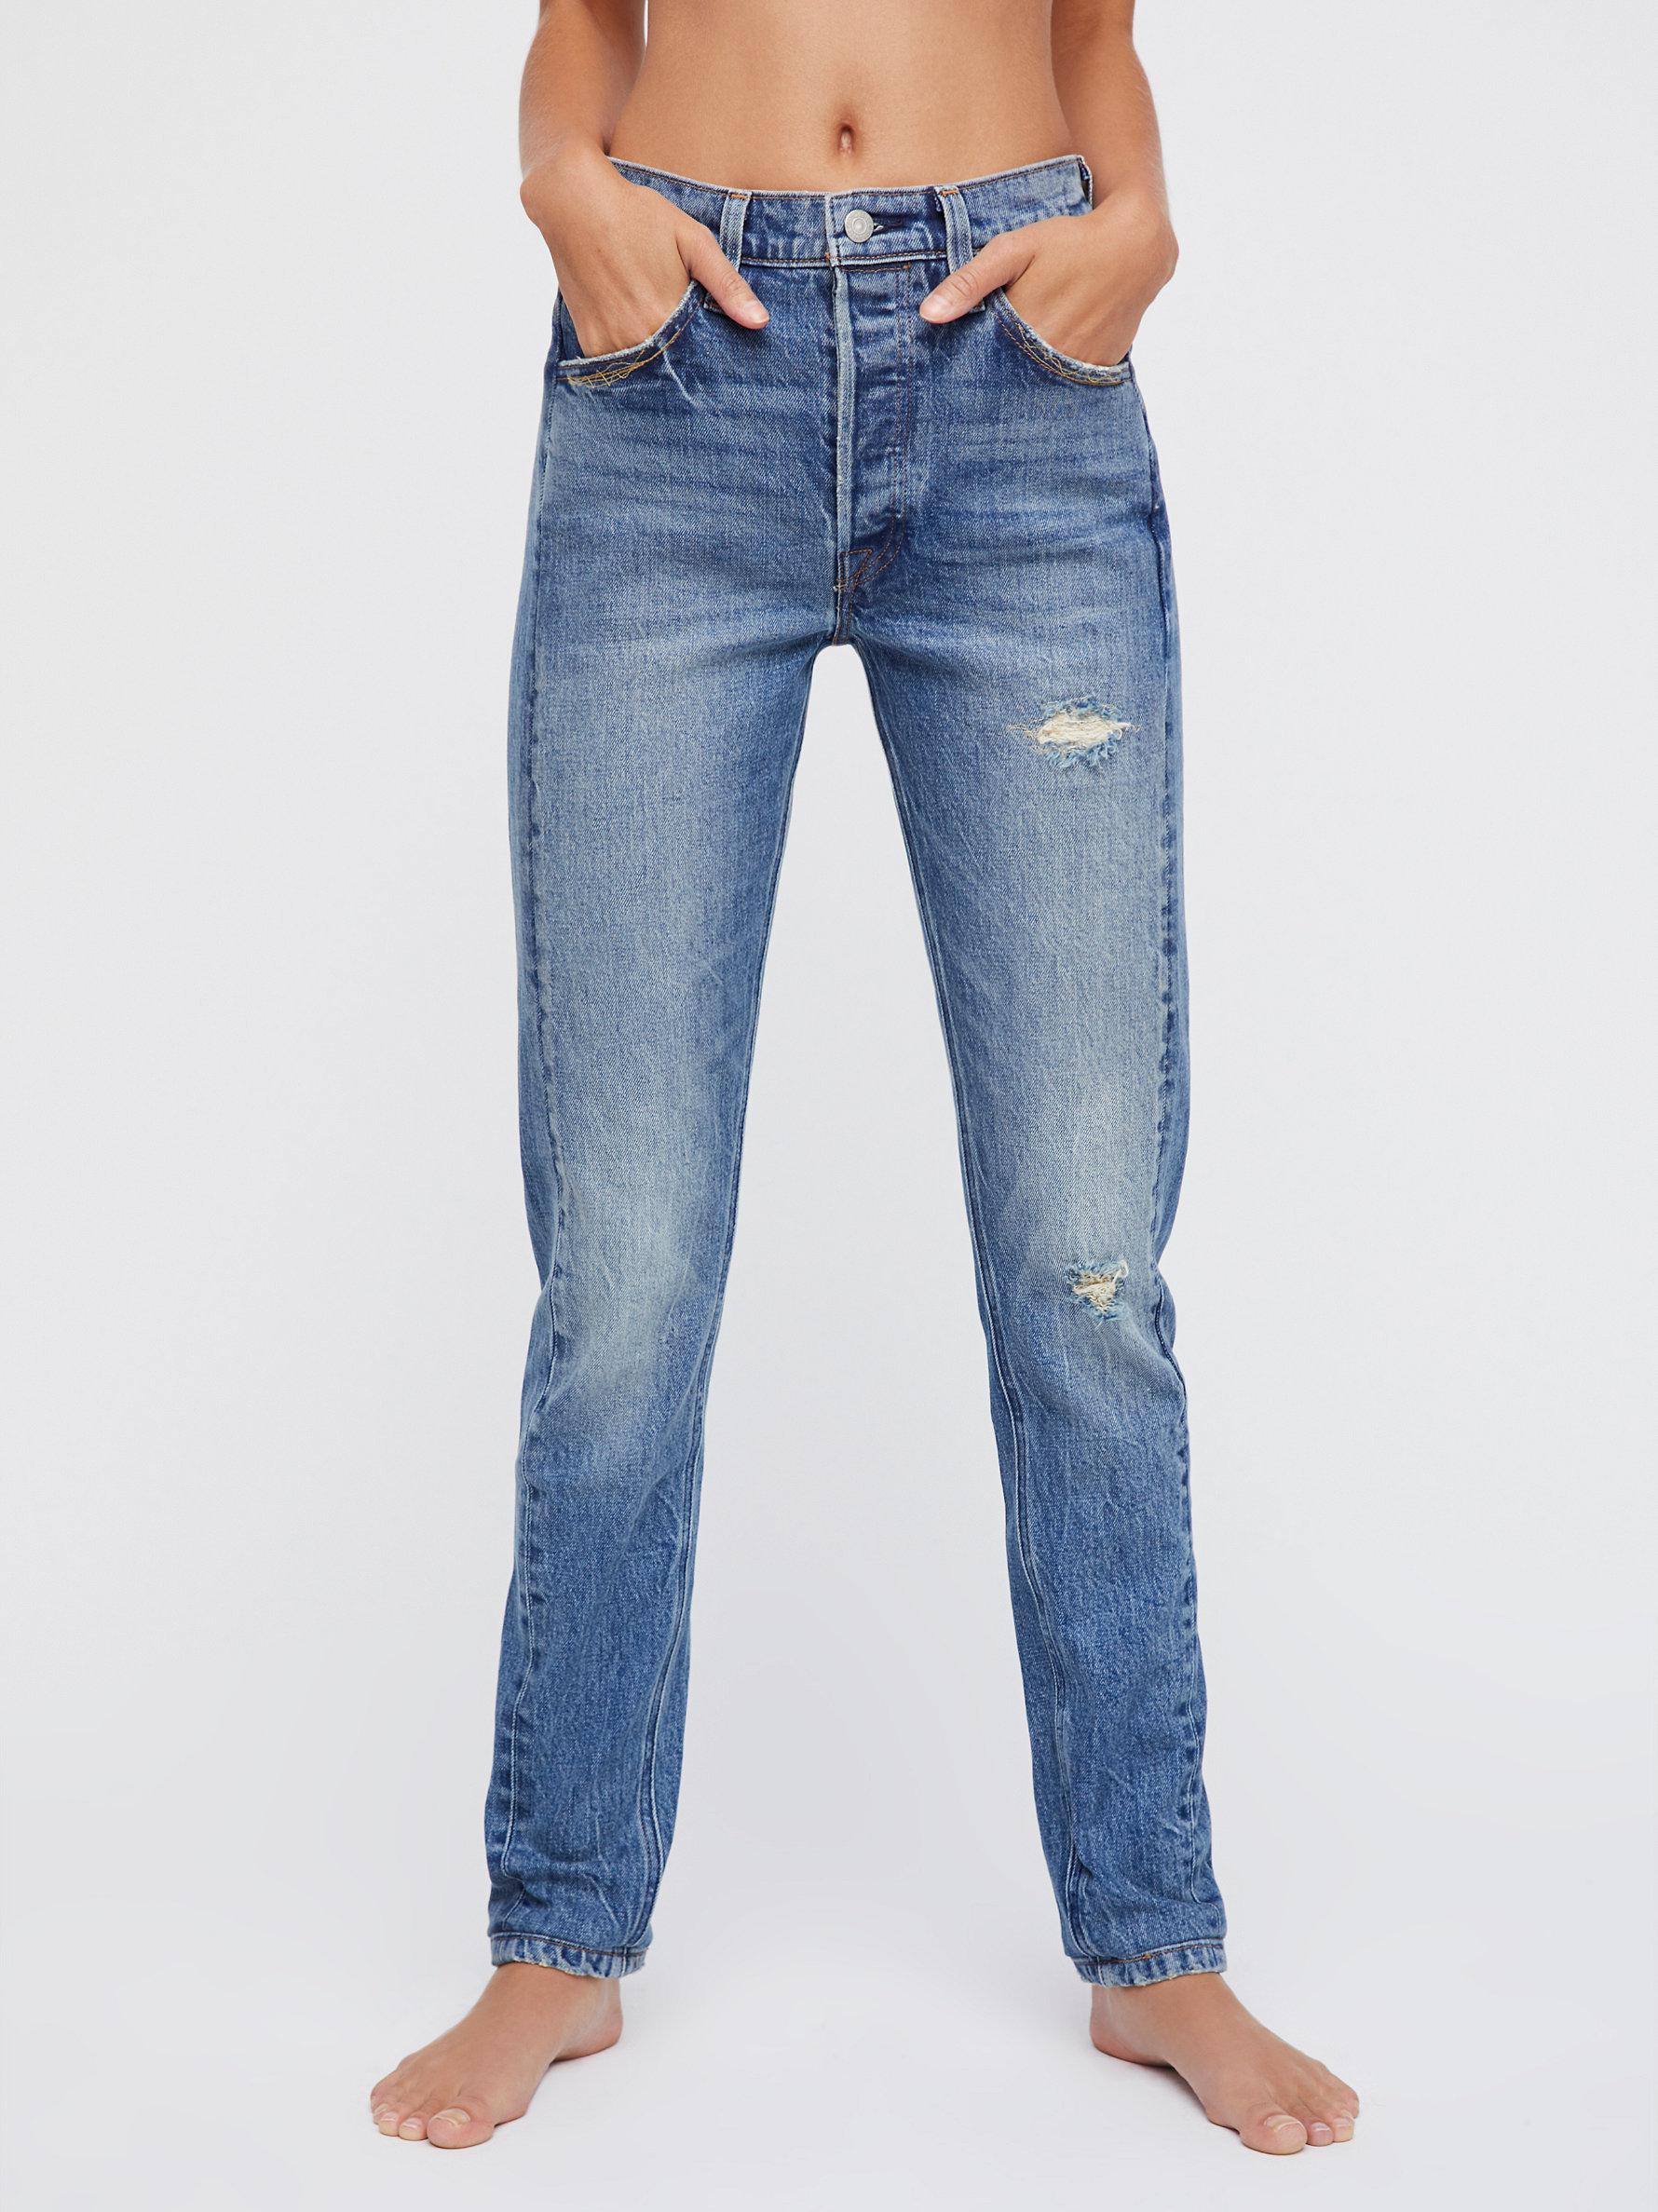 Free People Levi's 501 Skinny Altered Jeans in Blue | Lyst